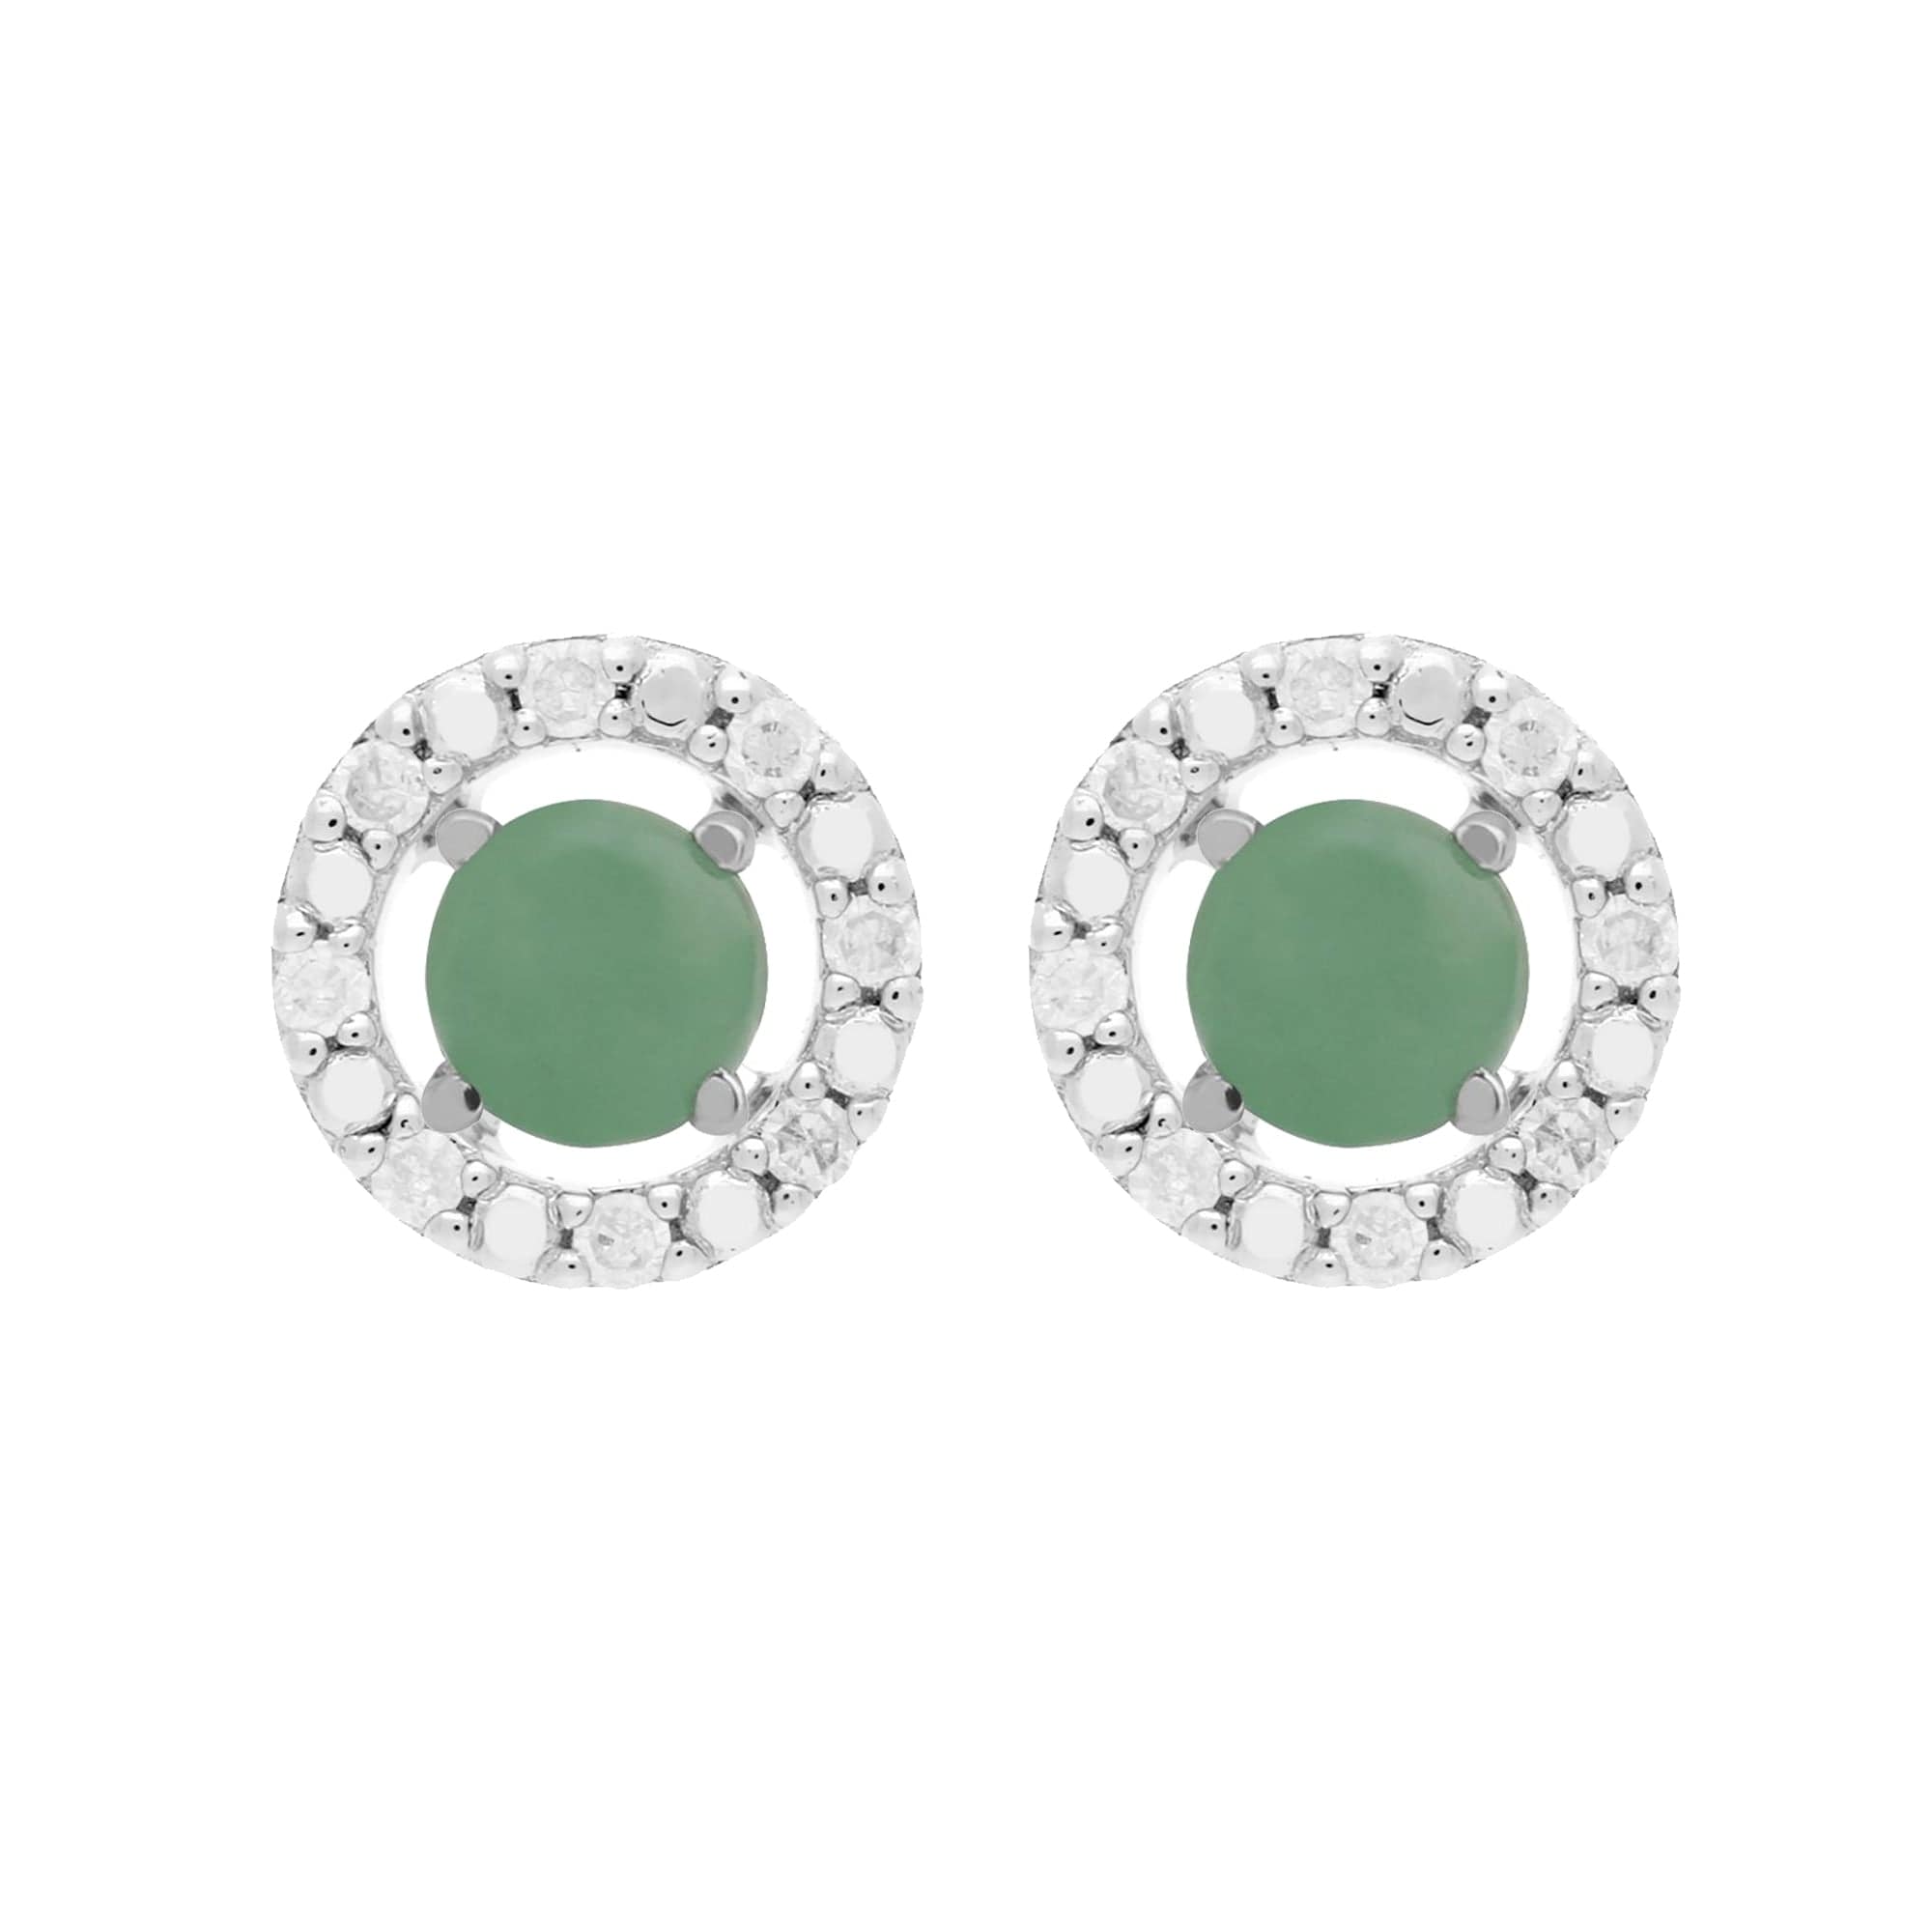 162E0071149-162E0228019 Classic Round Jade Stud Earrings and Detachable Diamond Round Ear Jacket in 9ct White Gold 1